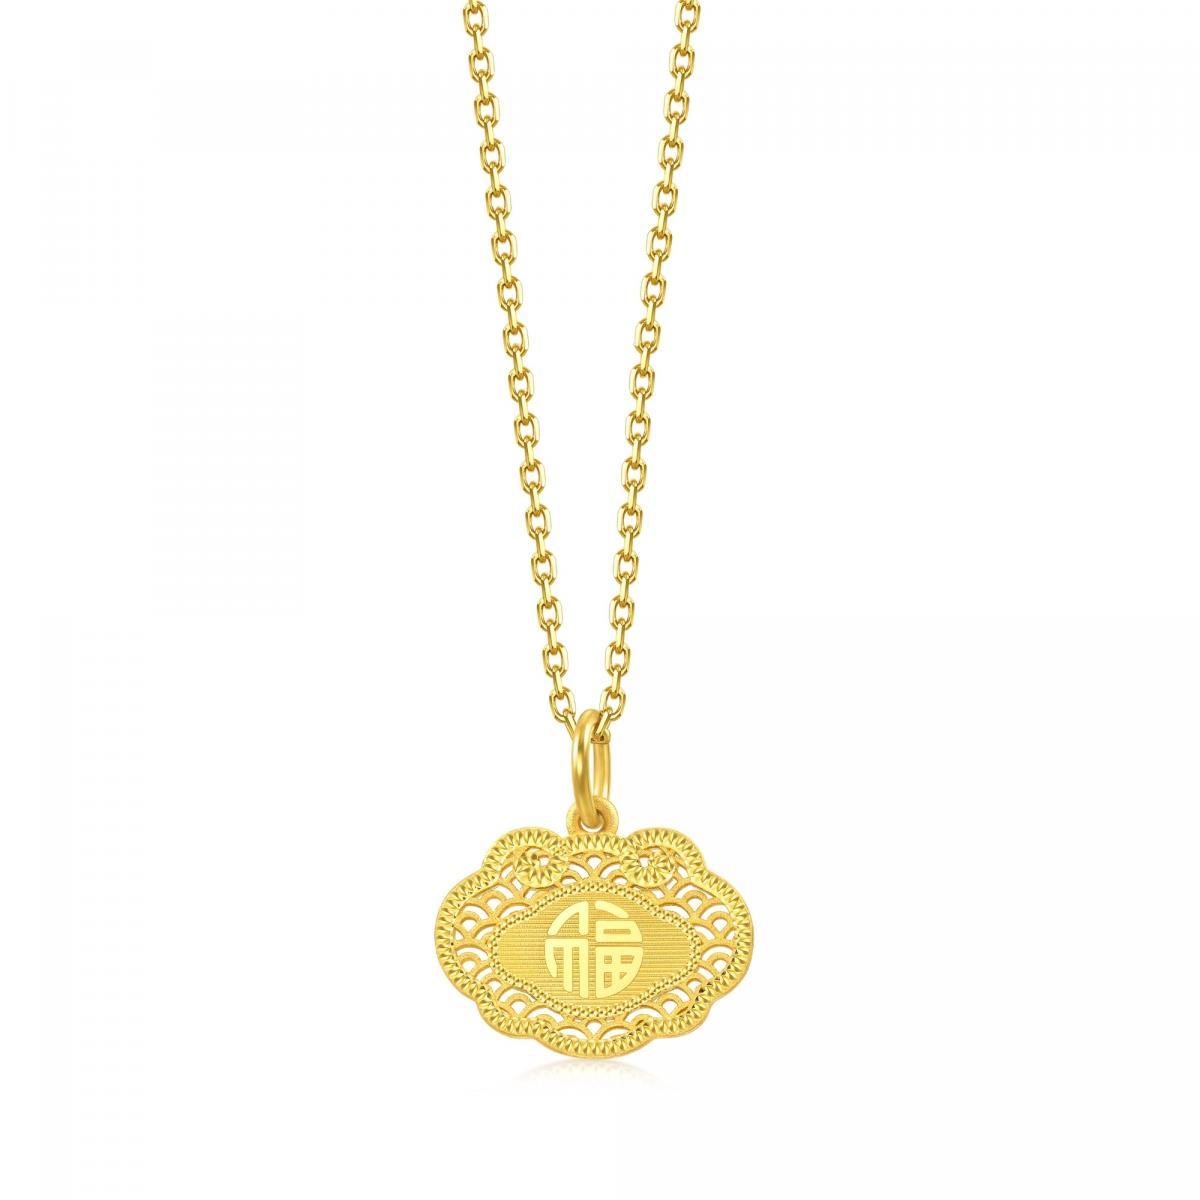 Cultural Blessing 'Daily Bliss' 999.9 Gold   Pendant 94467P Price-by-Weight approx 0.12 tael